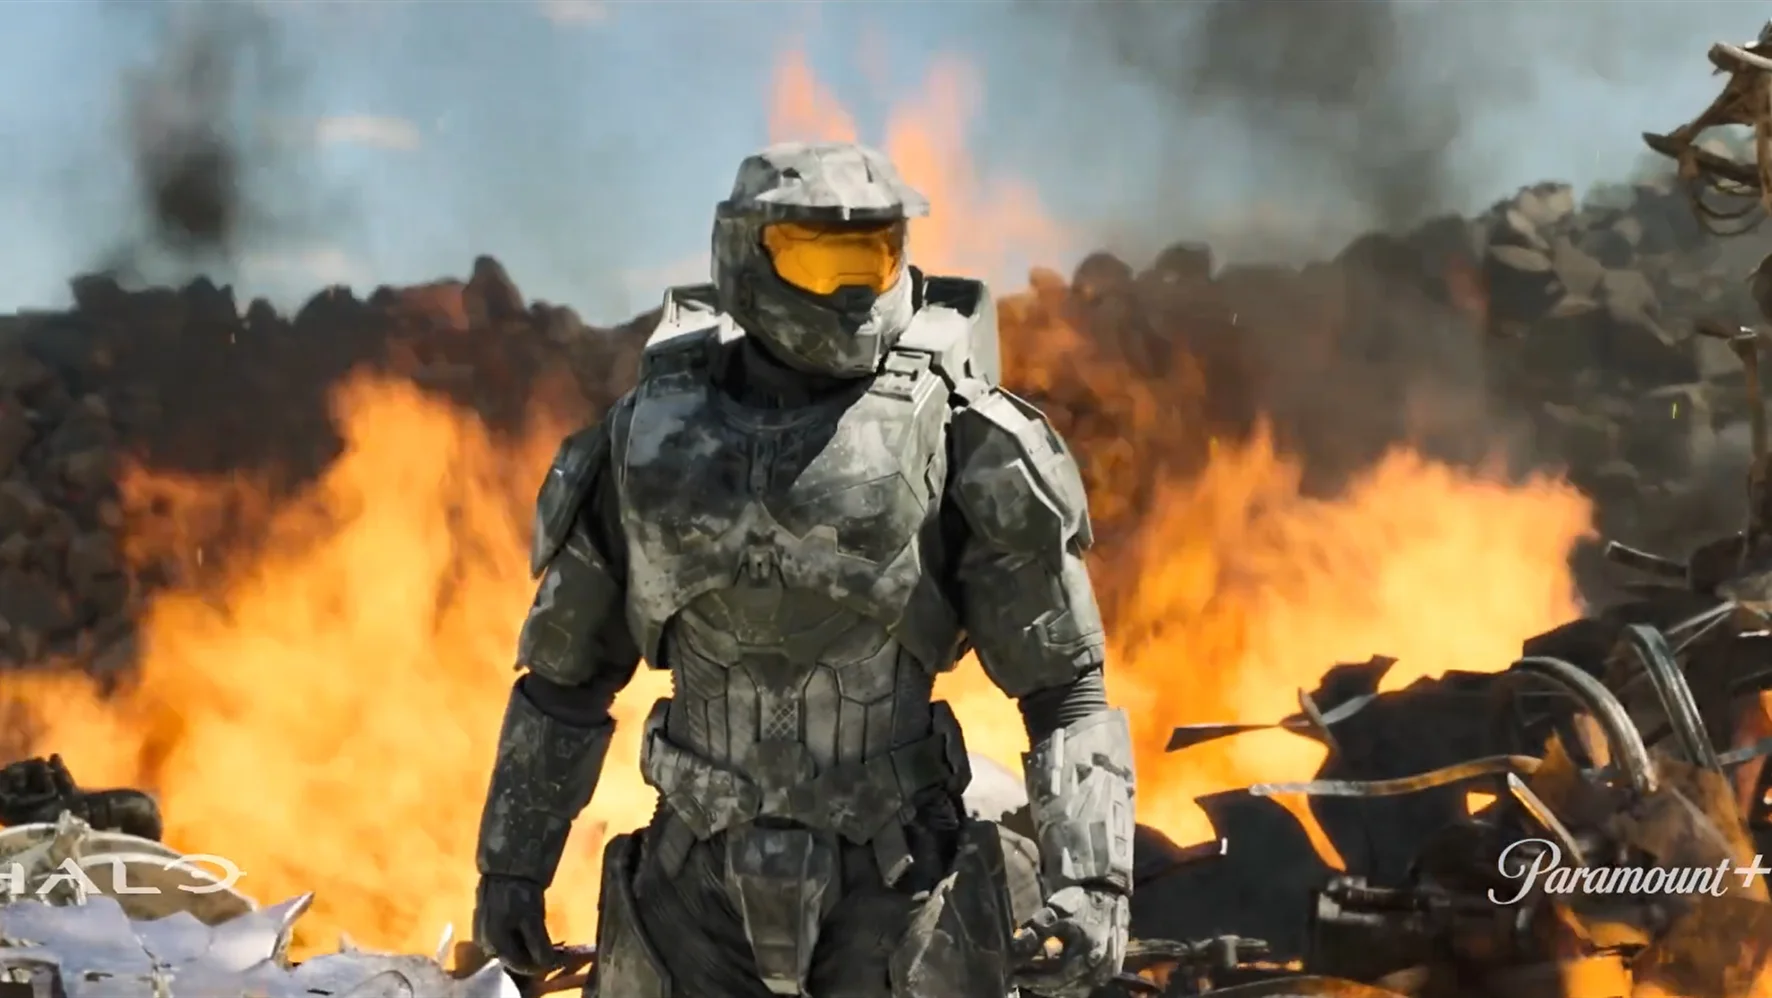 the-game-adaptation-of-the-live-action-series-halo-season-1-released-official-trailer-it-will-be-launched-on-march-24-1